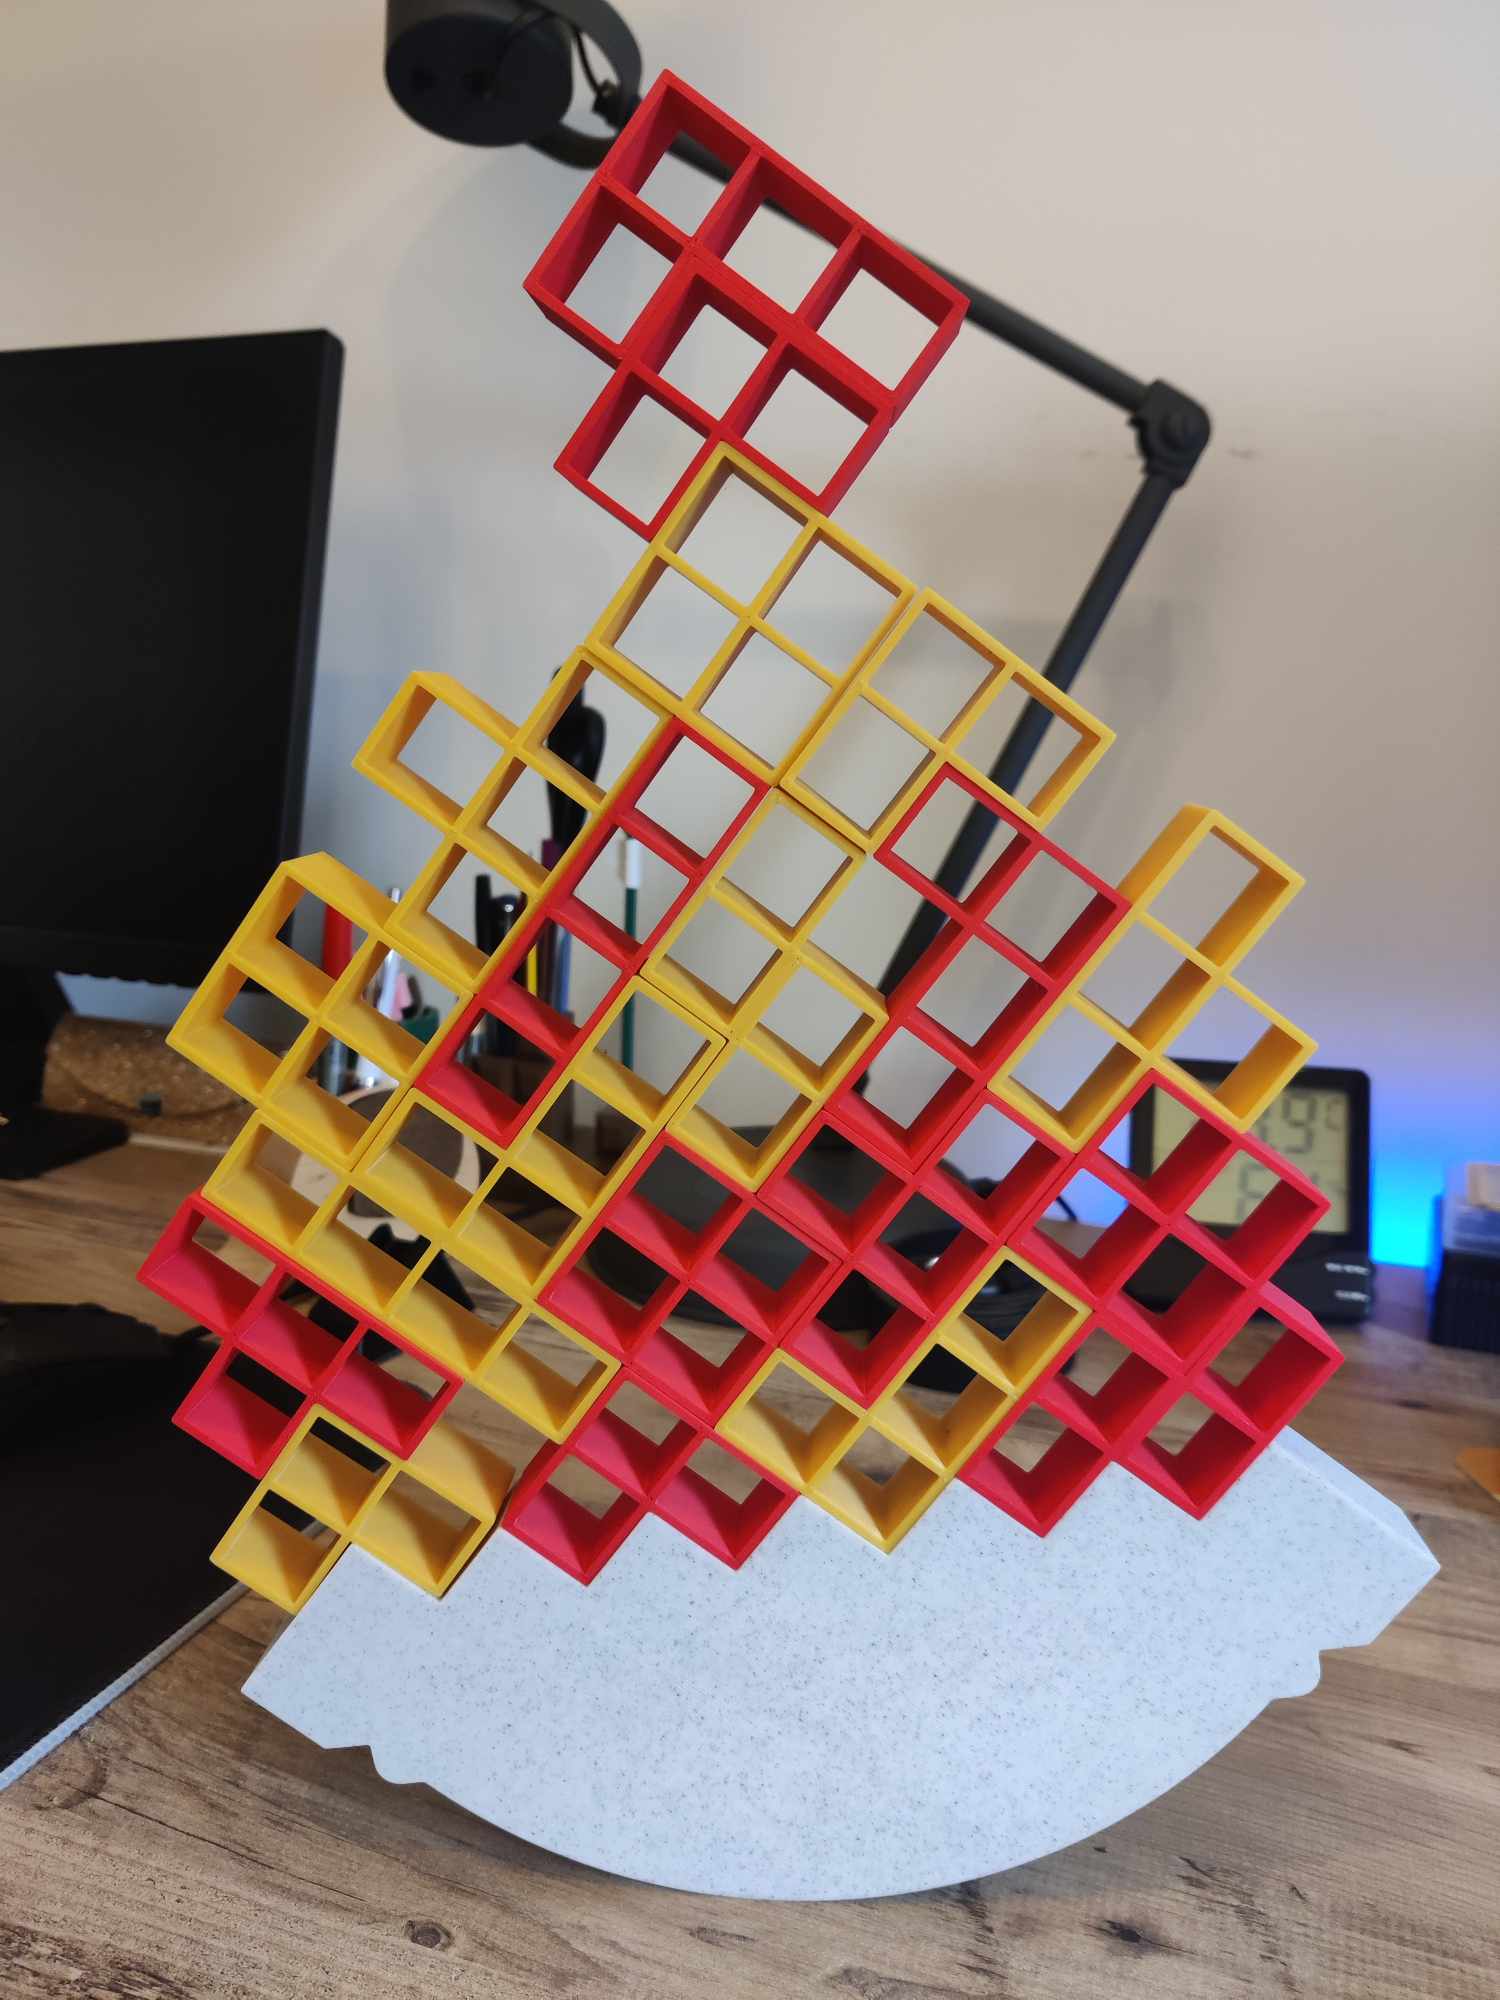 Tetra Tower - A Brick Balancing Game by DSpecter